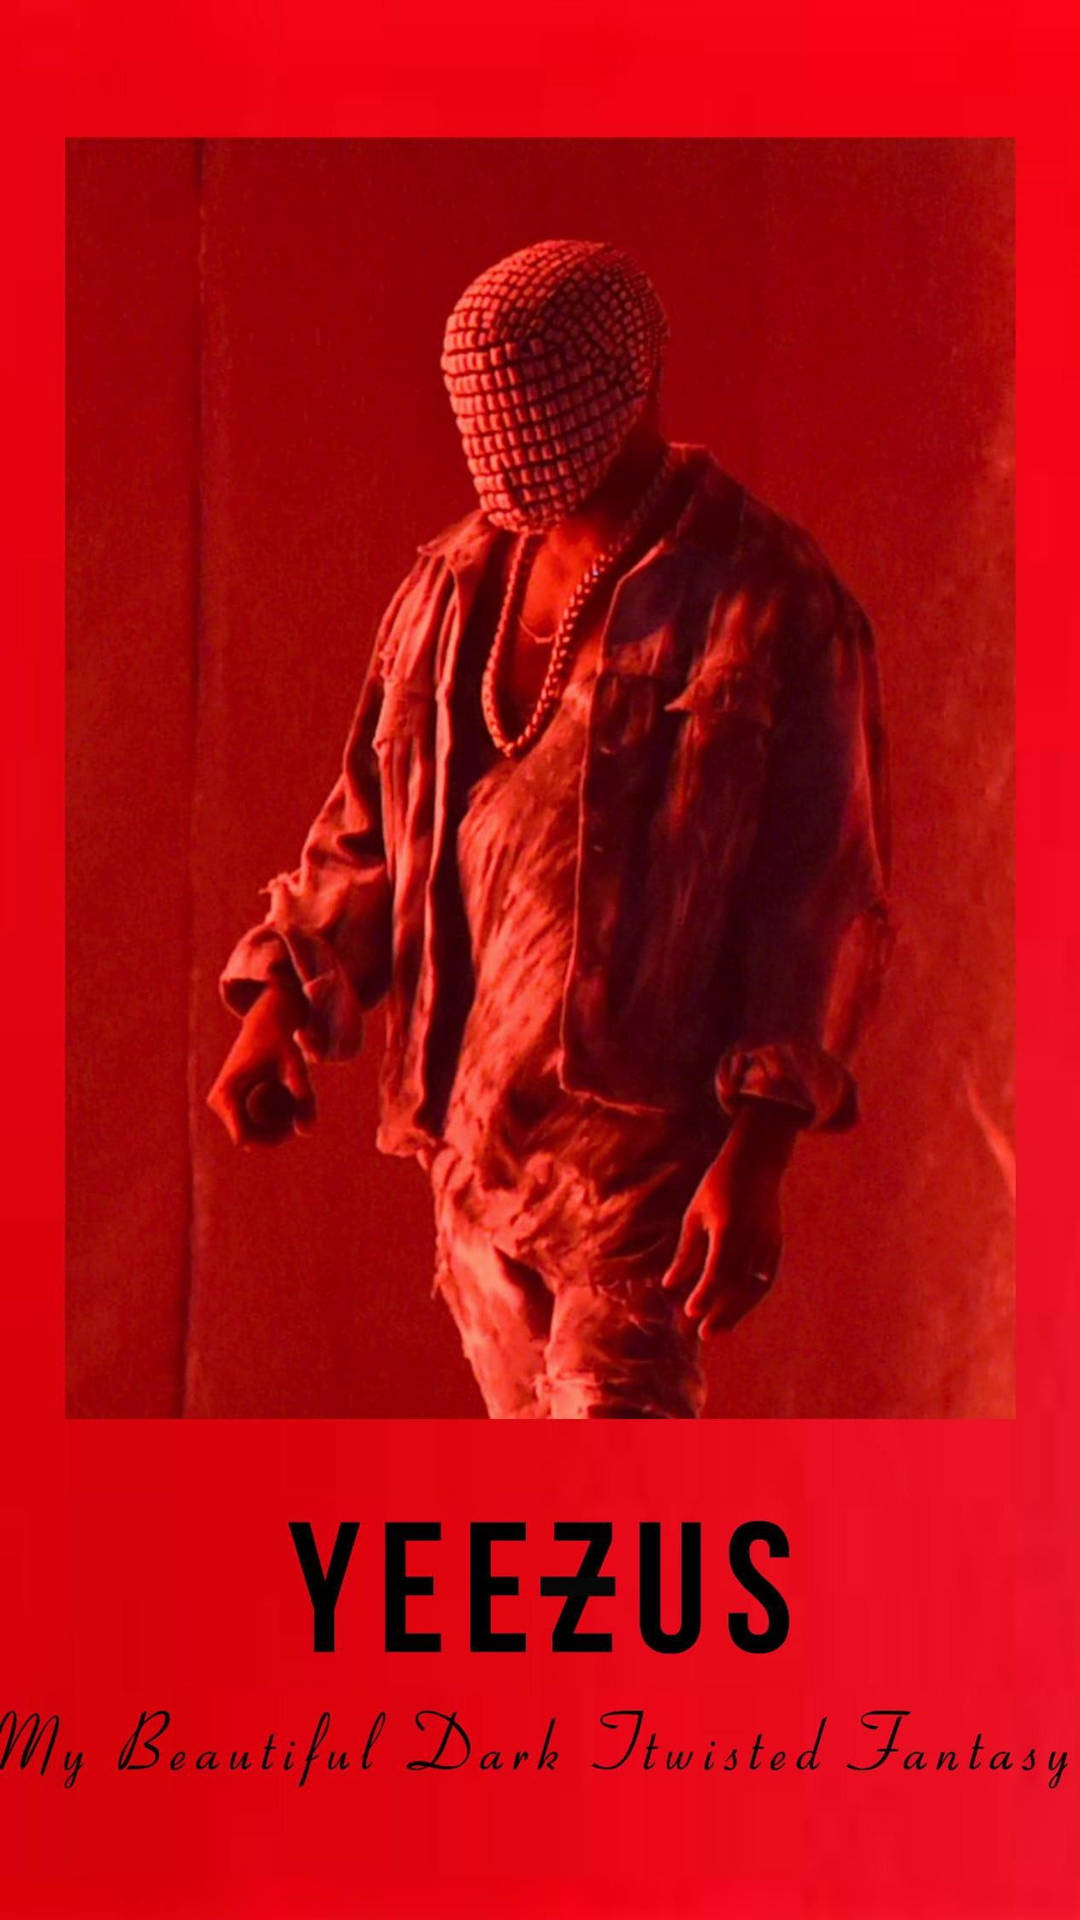 Kanye West's Latest Album Cover Wallpaper